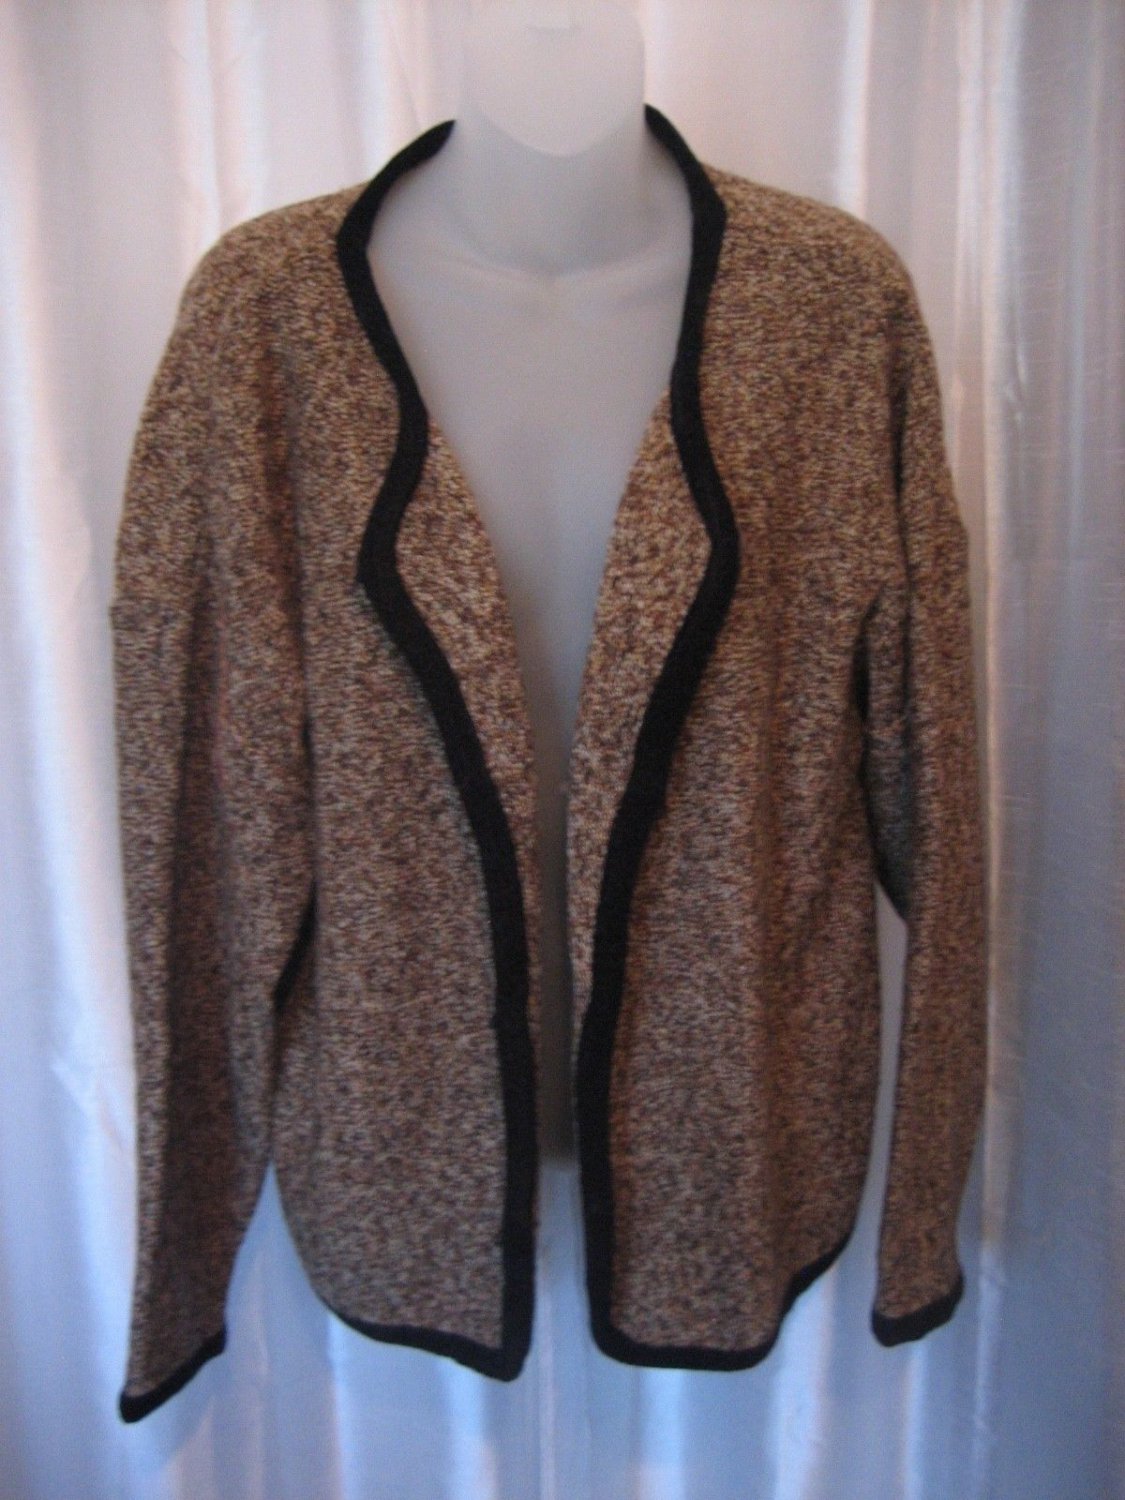 Coldwater Creek Women's Multi-Brown Open Sweater with Black Trim Sz 1X NWNT